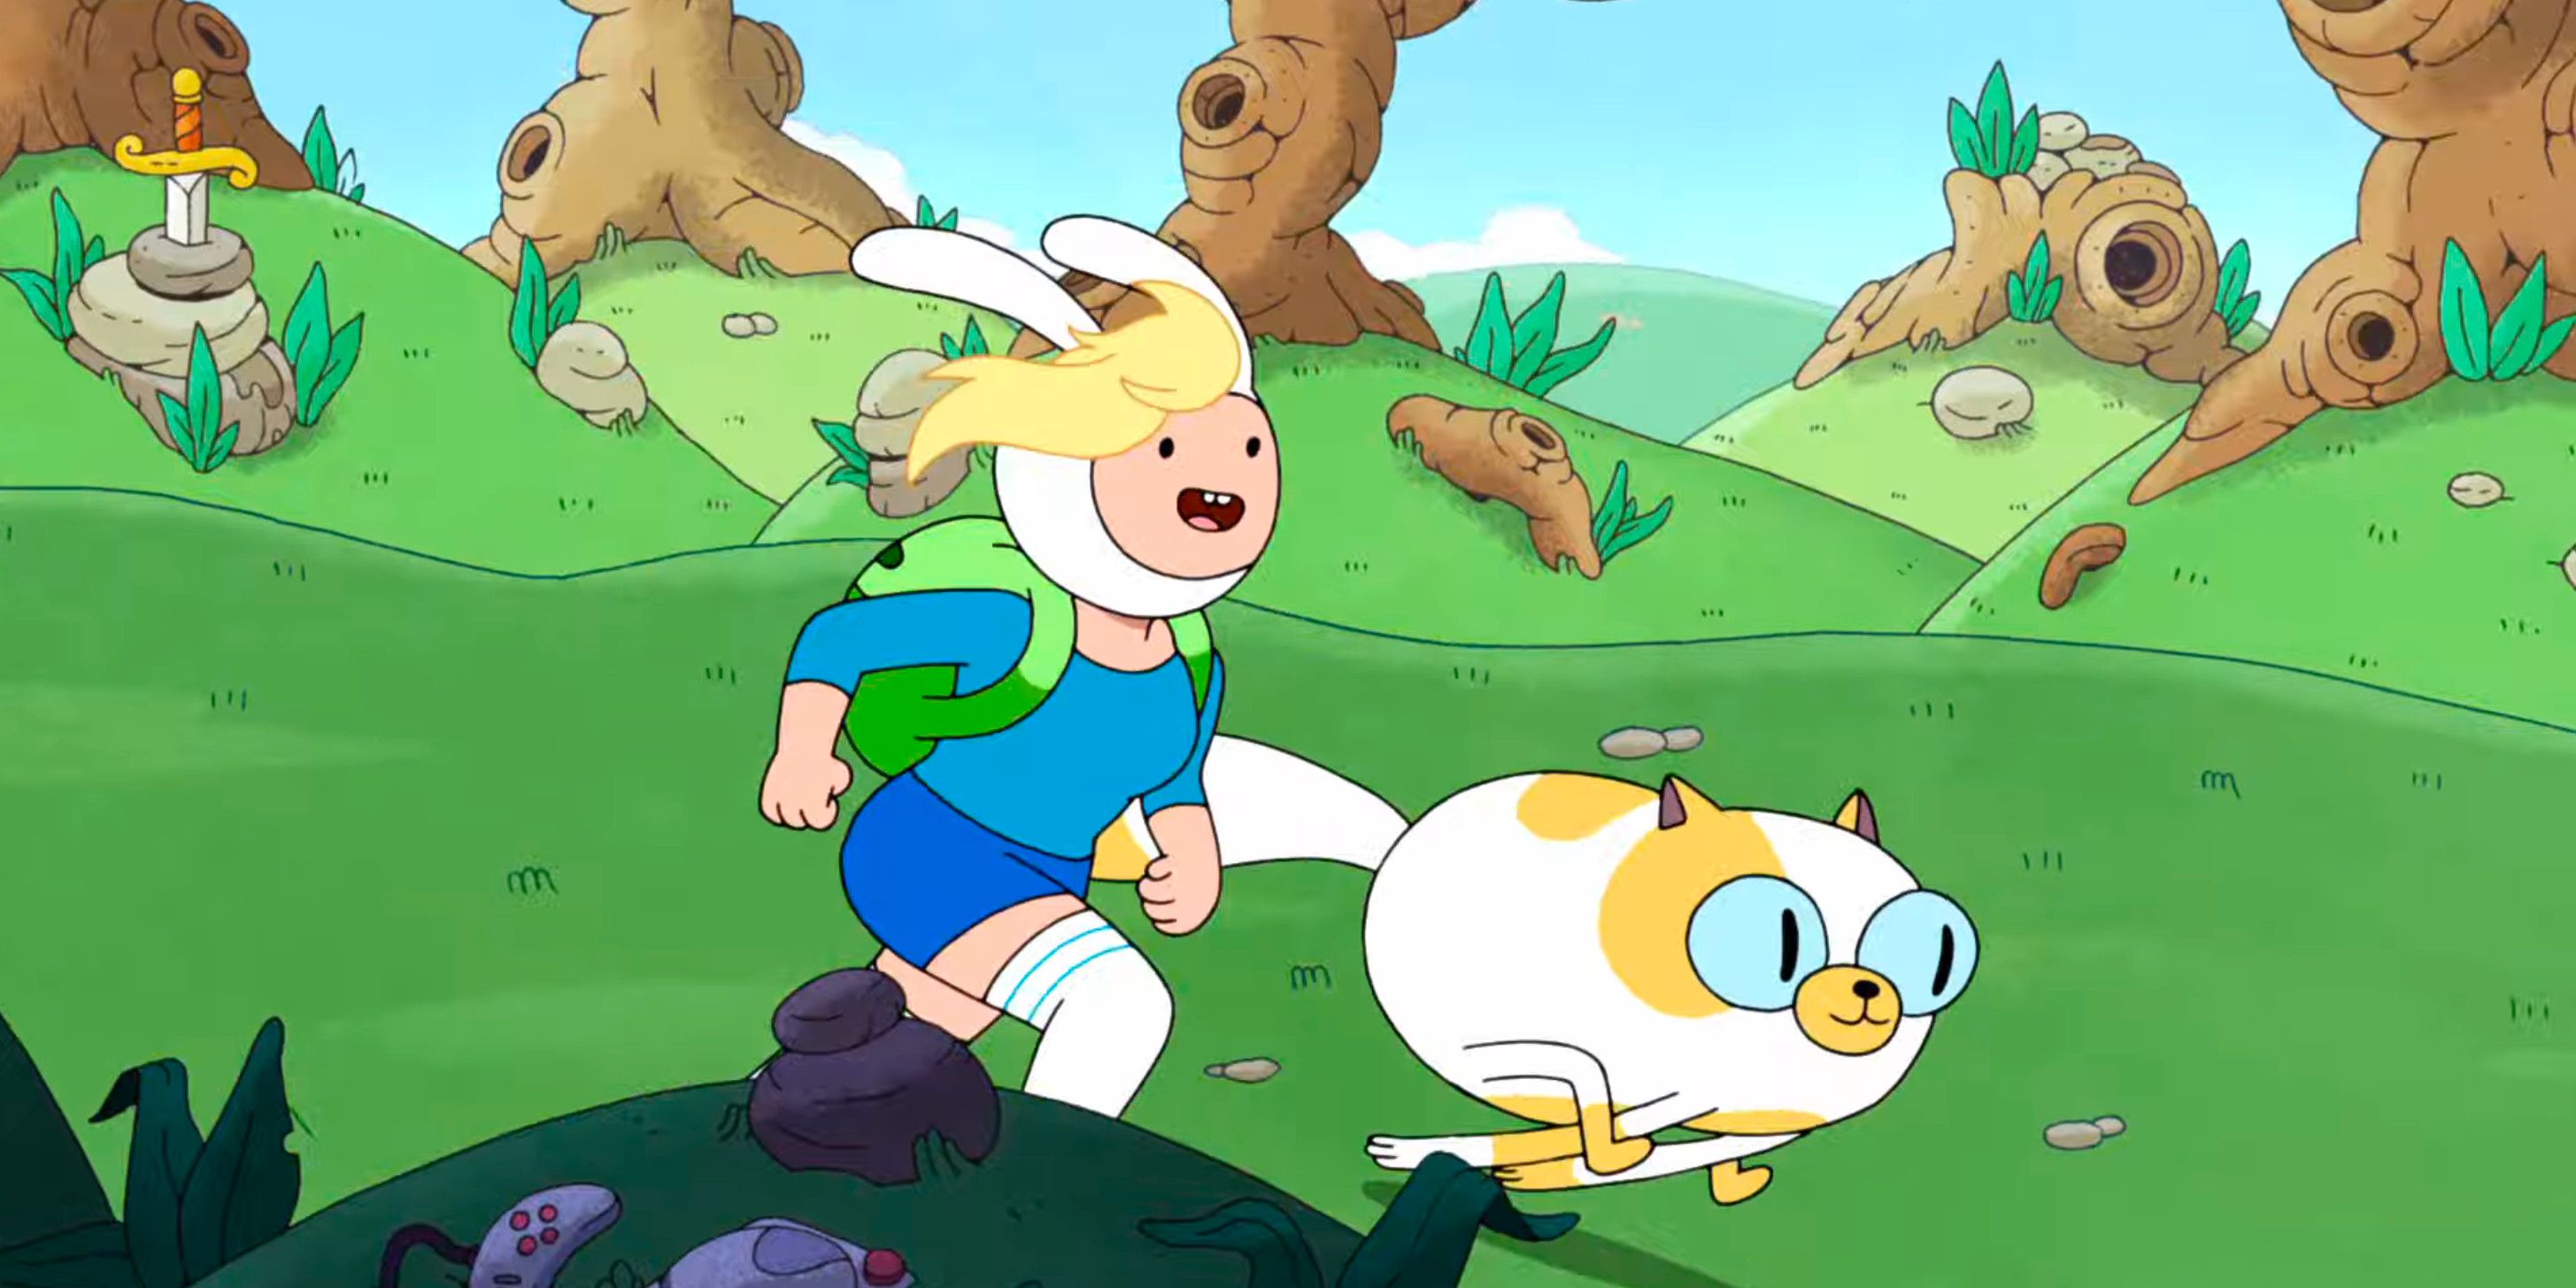 Adventure time fin and cake. Fionna Fionna and jake. And bmo